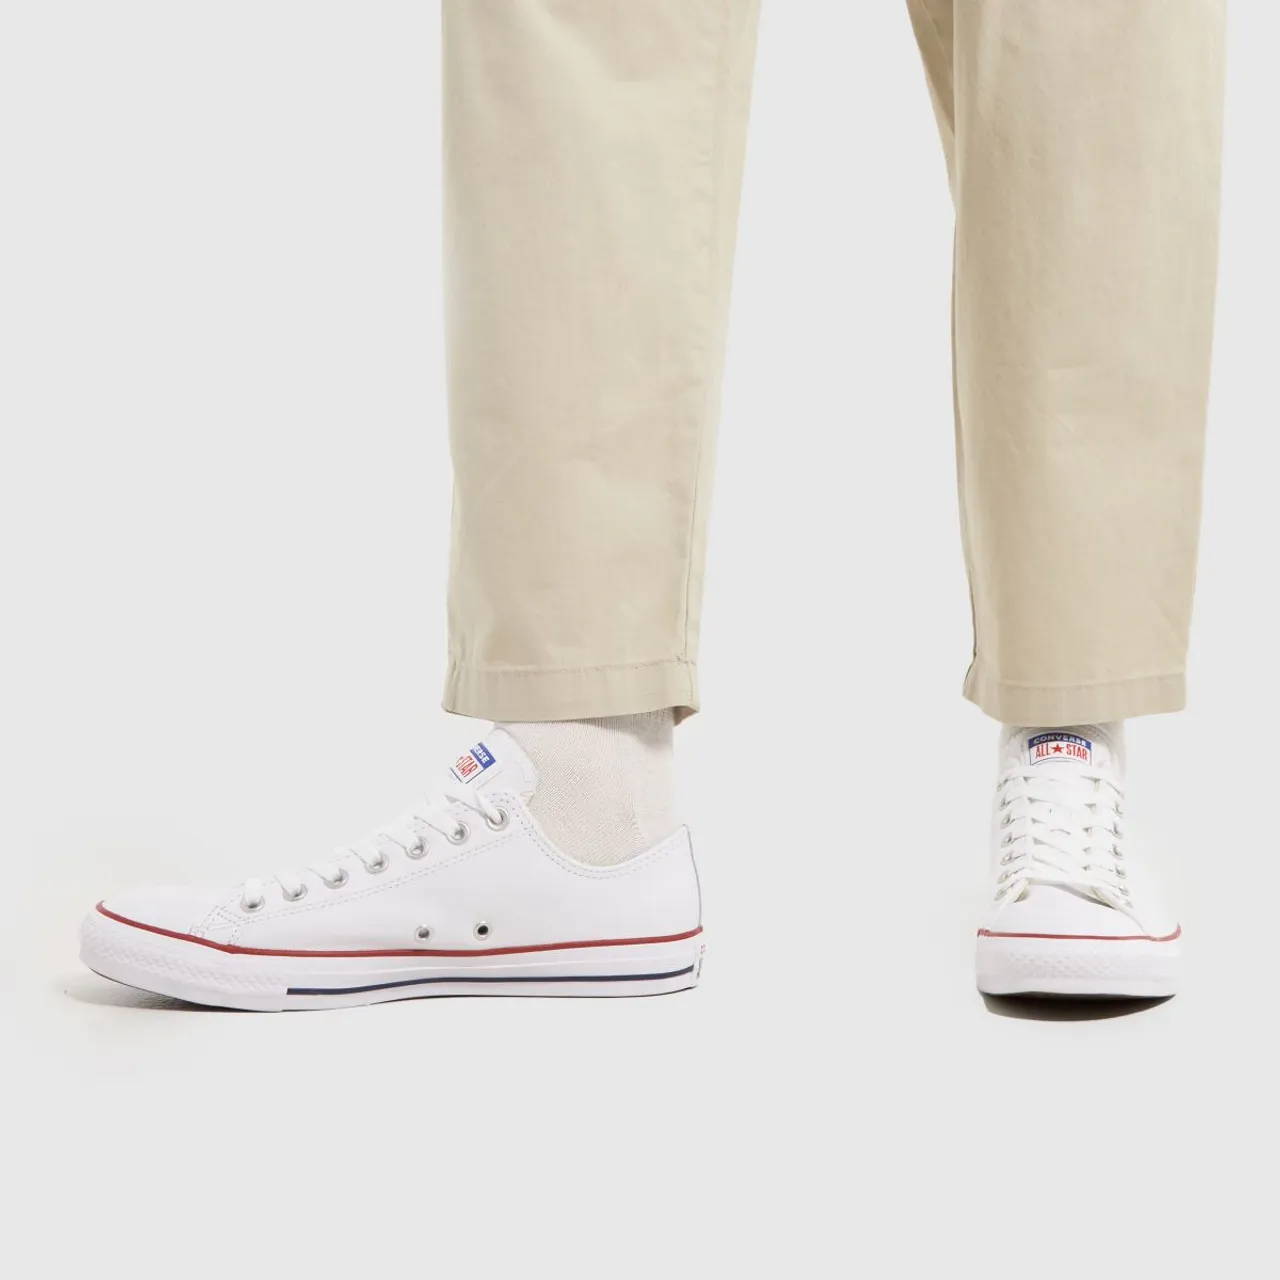 Converse All Star Ox Trainers In White